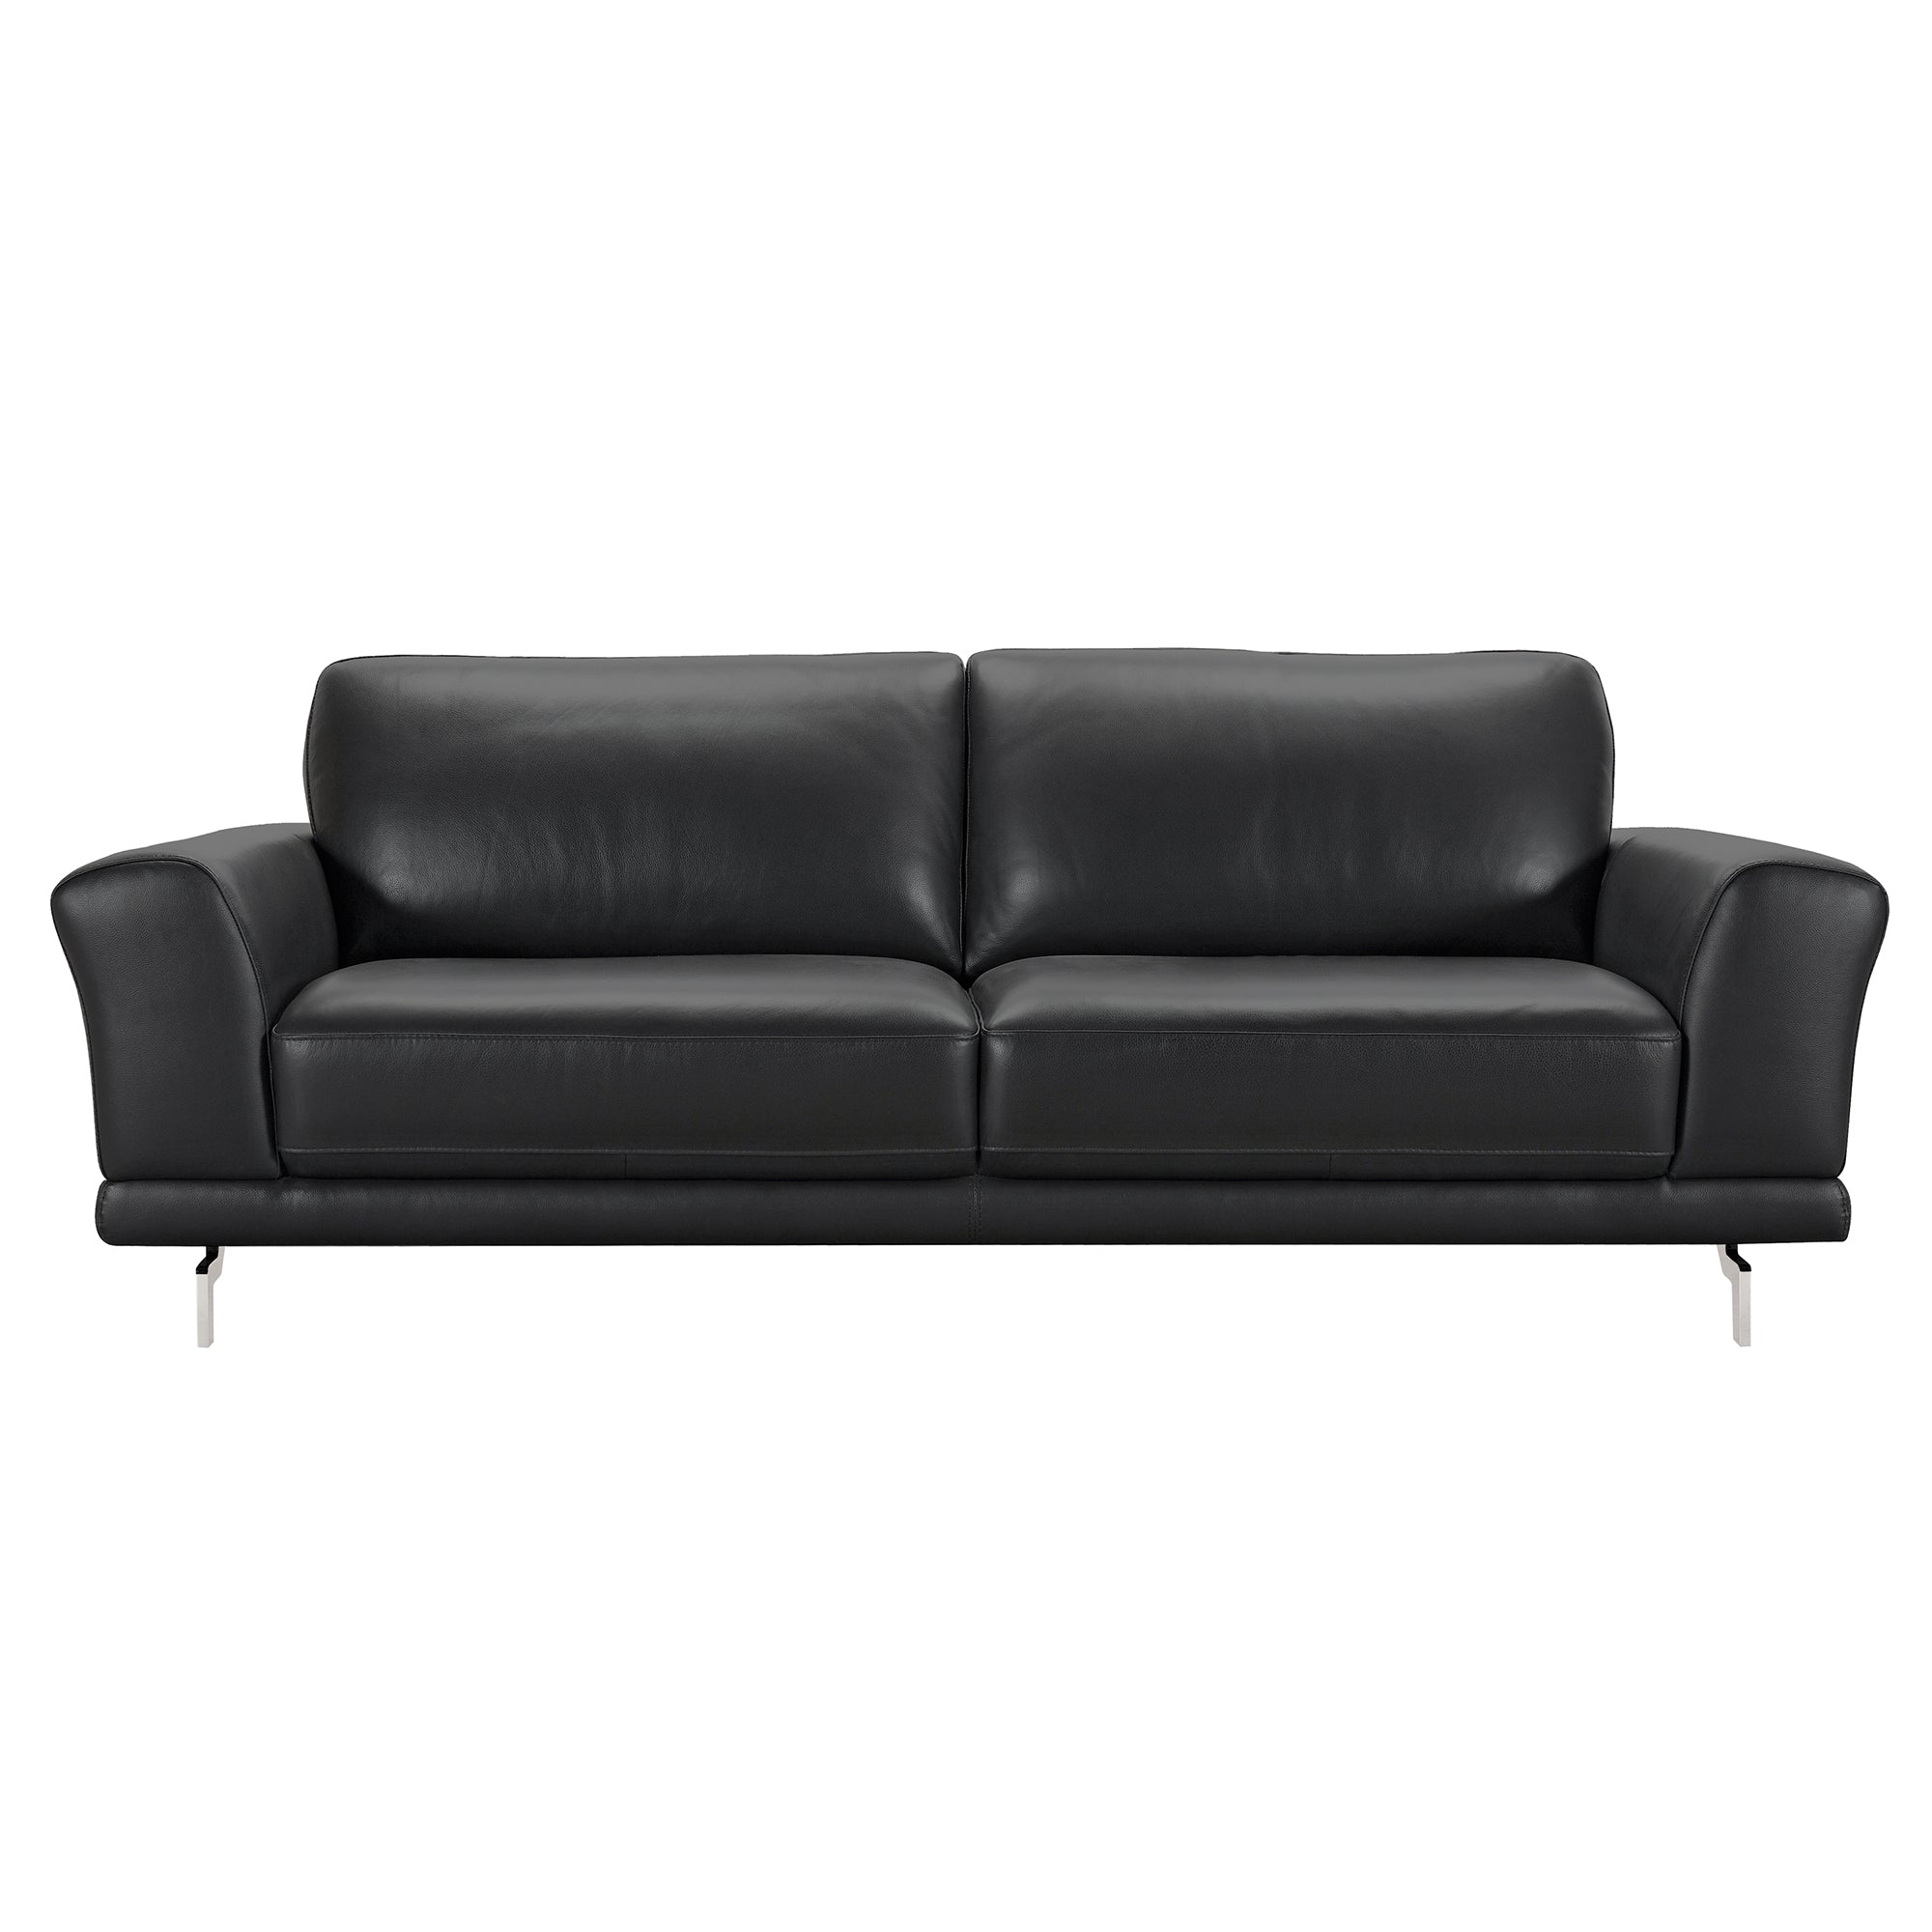 Armen Living Lcev3bl Everly Contemporary Sofa In Genuine Black Leather With Brushed Stainless Steel Legs